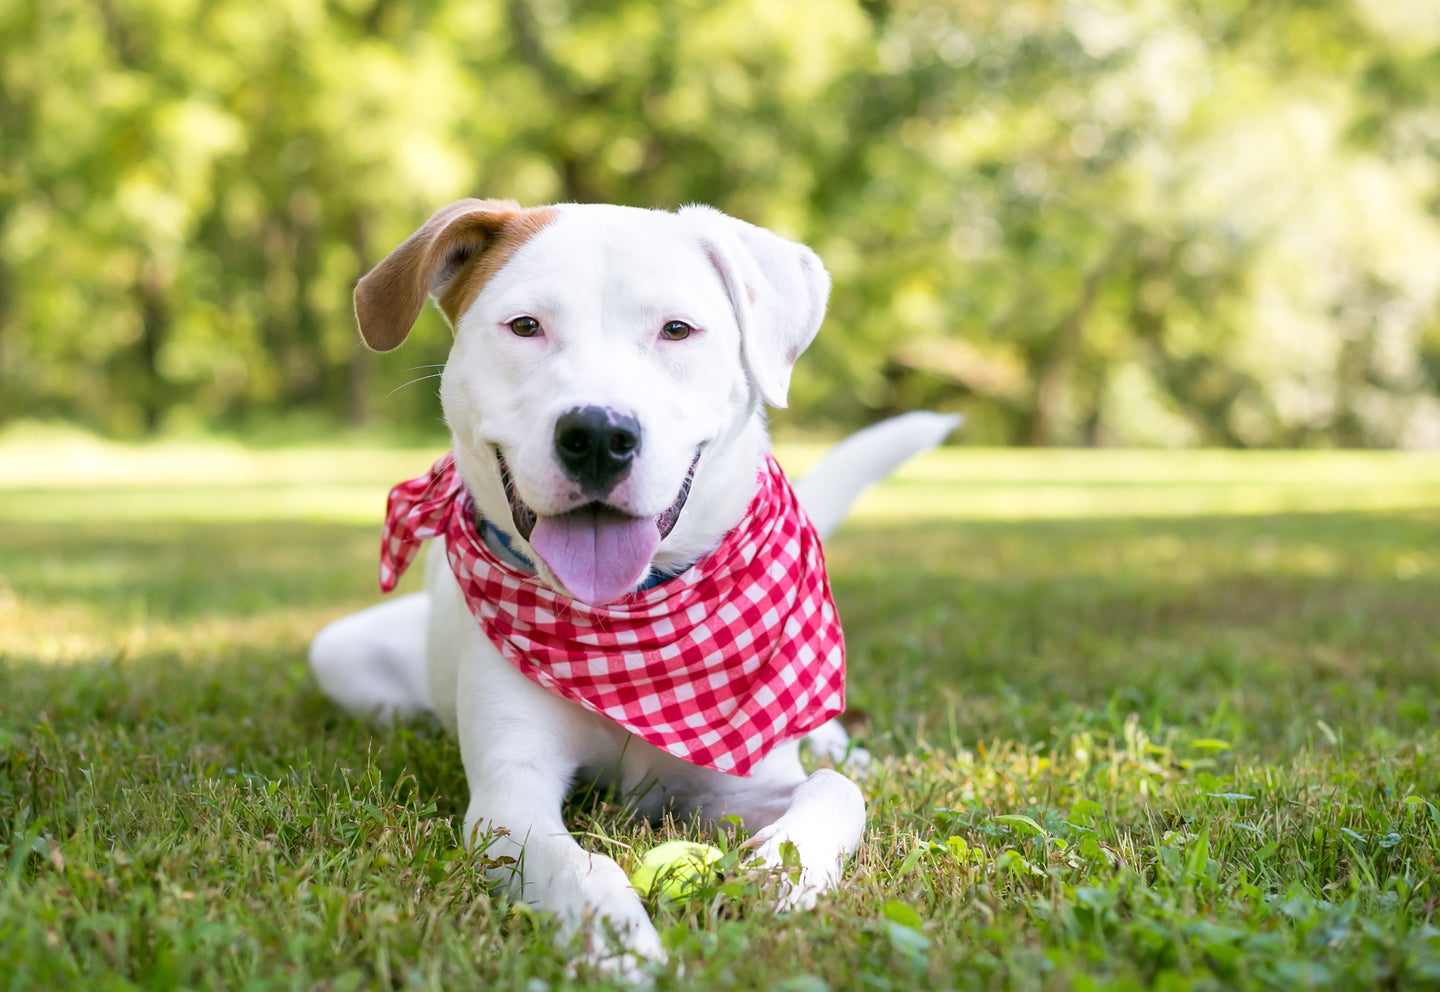 Bandanas - Perfect little gift, and on sale! Fun for the pooch too!